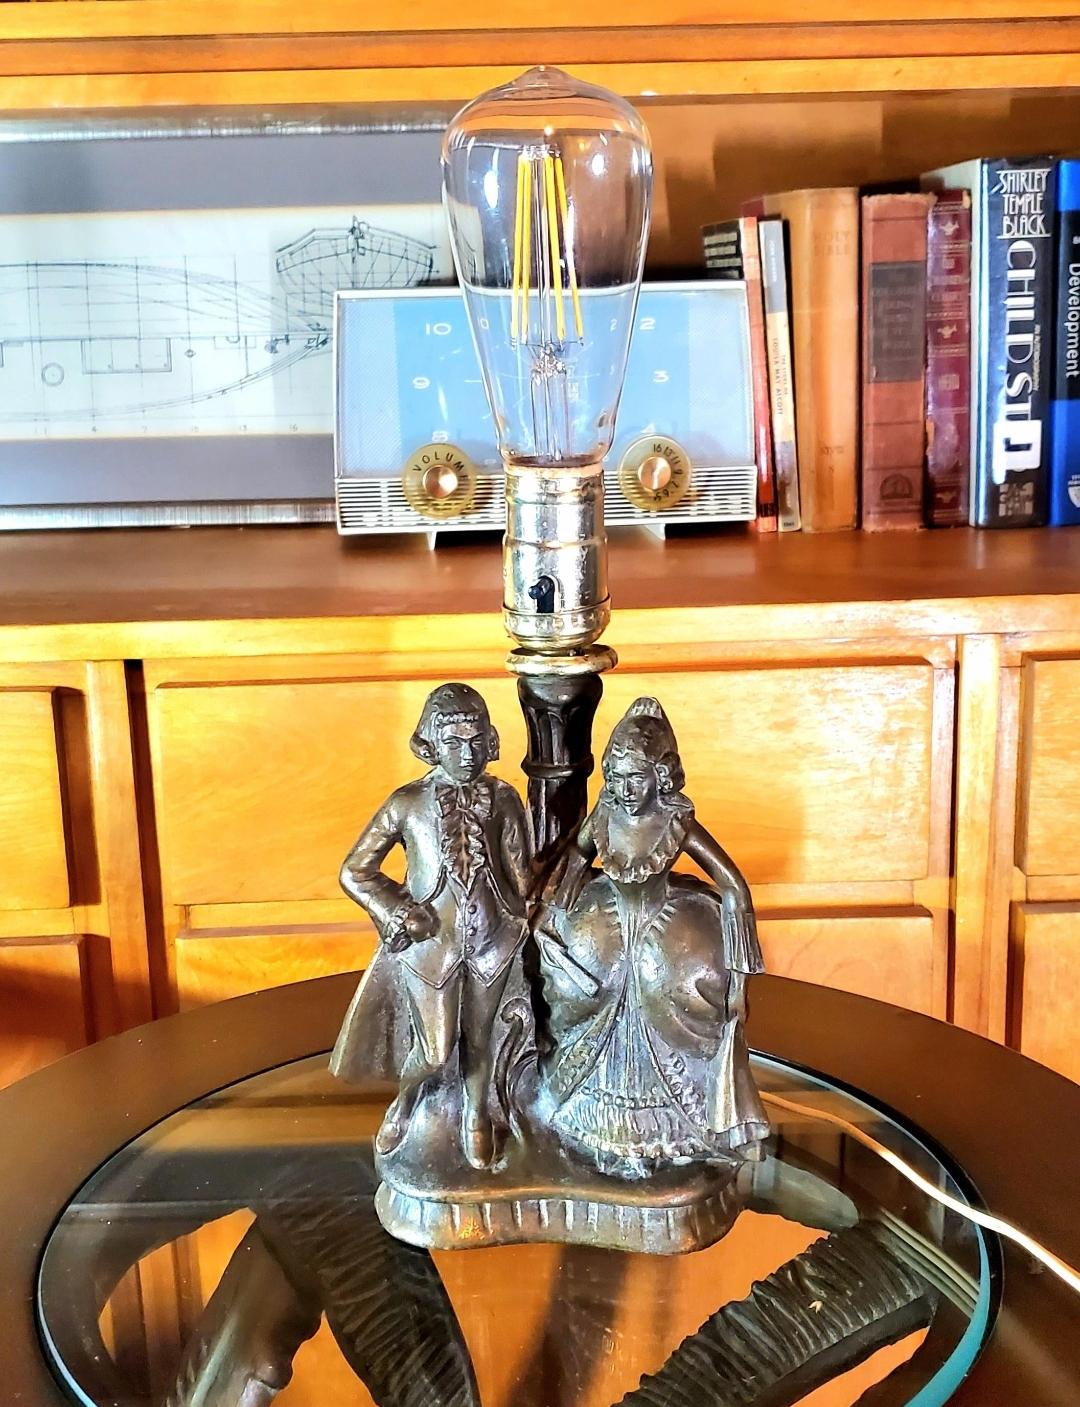 Absolutely gorgeous Vintage Authentic Japanese 'Victorian Couple' Boudoir Table Lamp.

The lamp Socket was Made in Canada 1920 - 1930 by Leviton 250W250V on the shell. Turn knob/Flat Paddle (old style) ANTIQUE. Brass shell with UNO thread for all